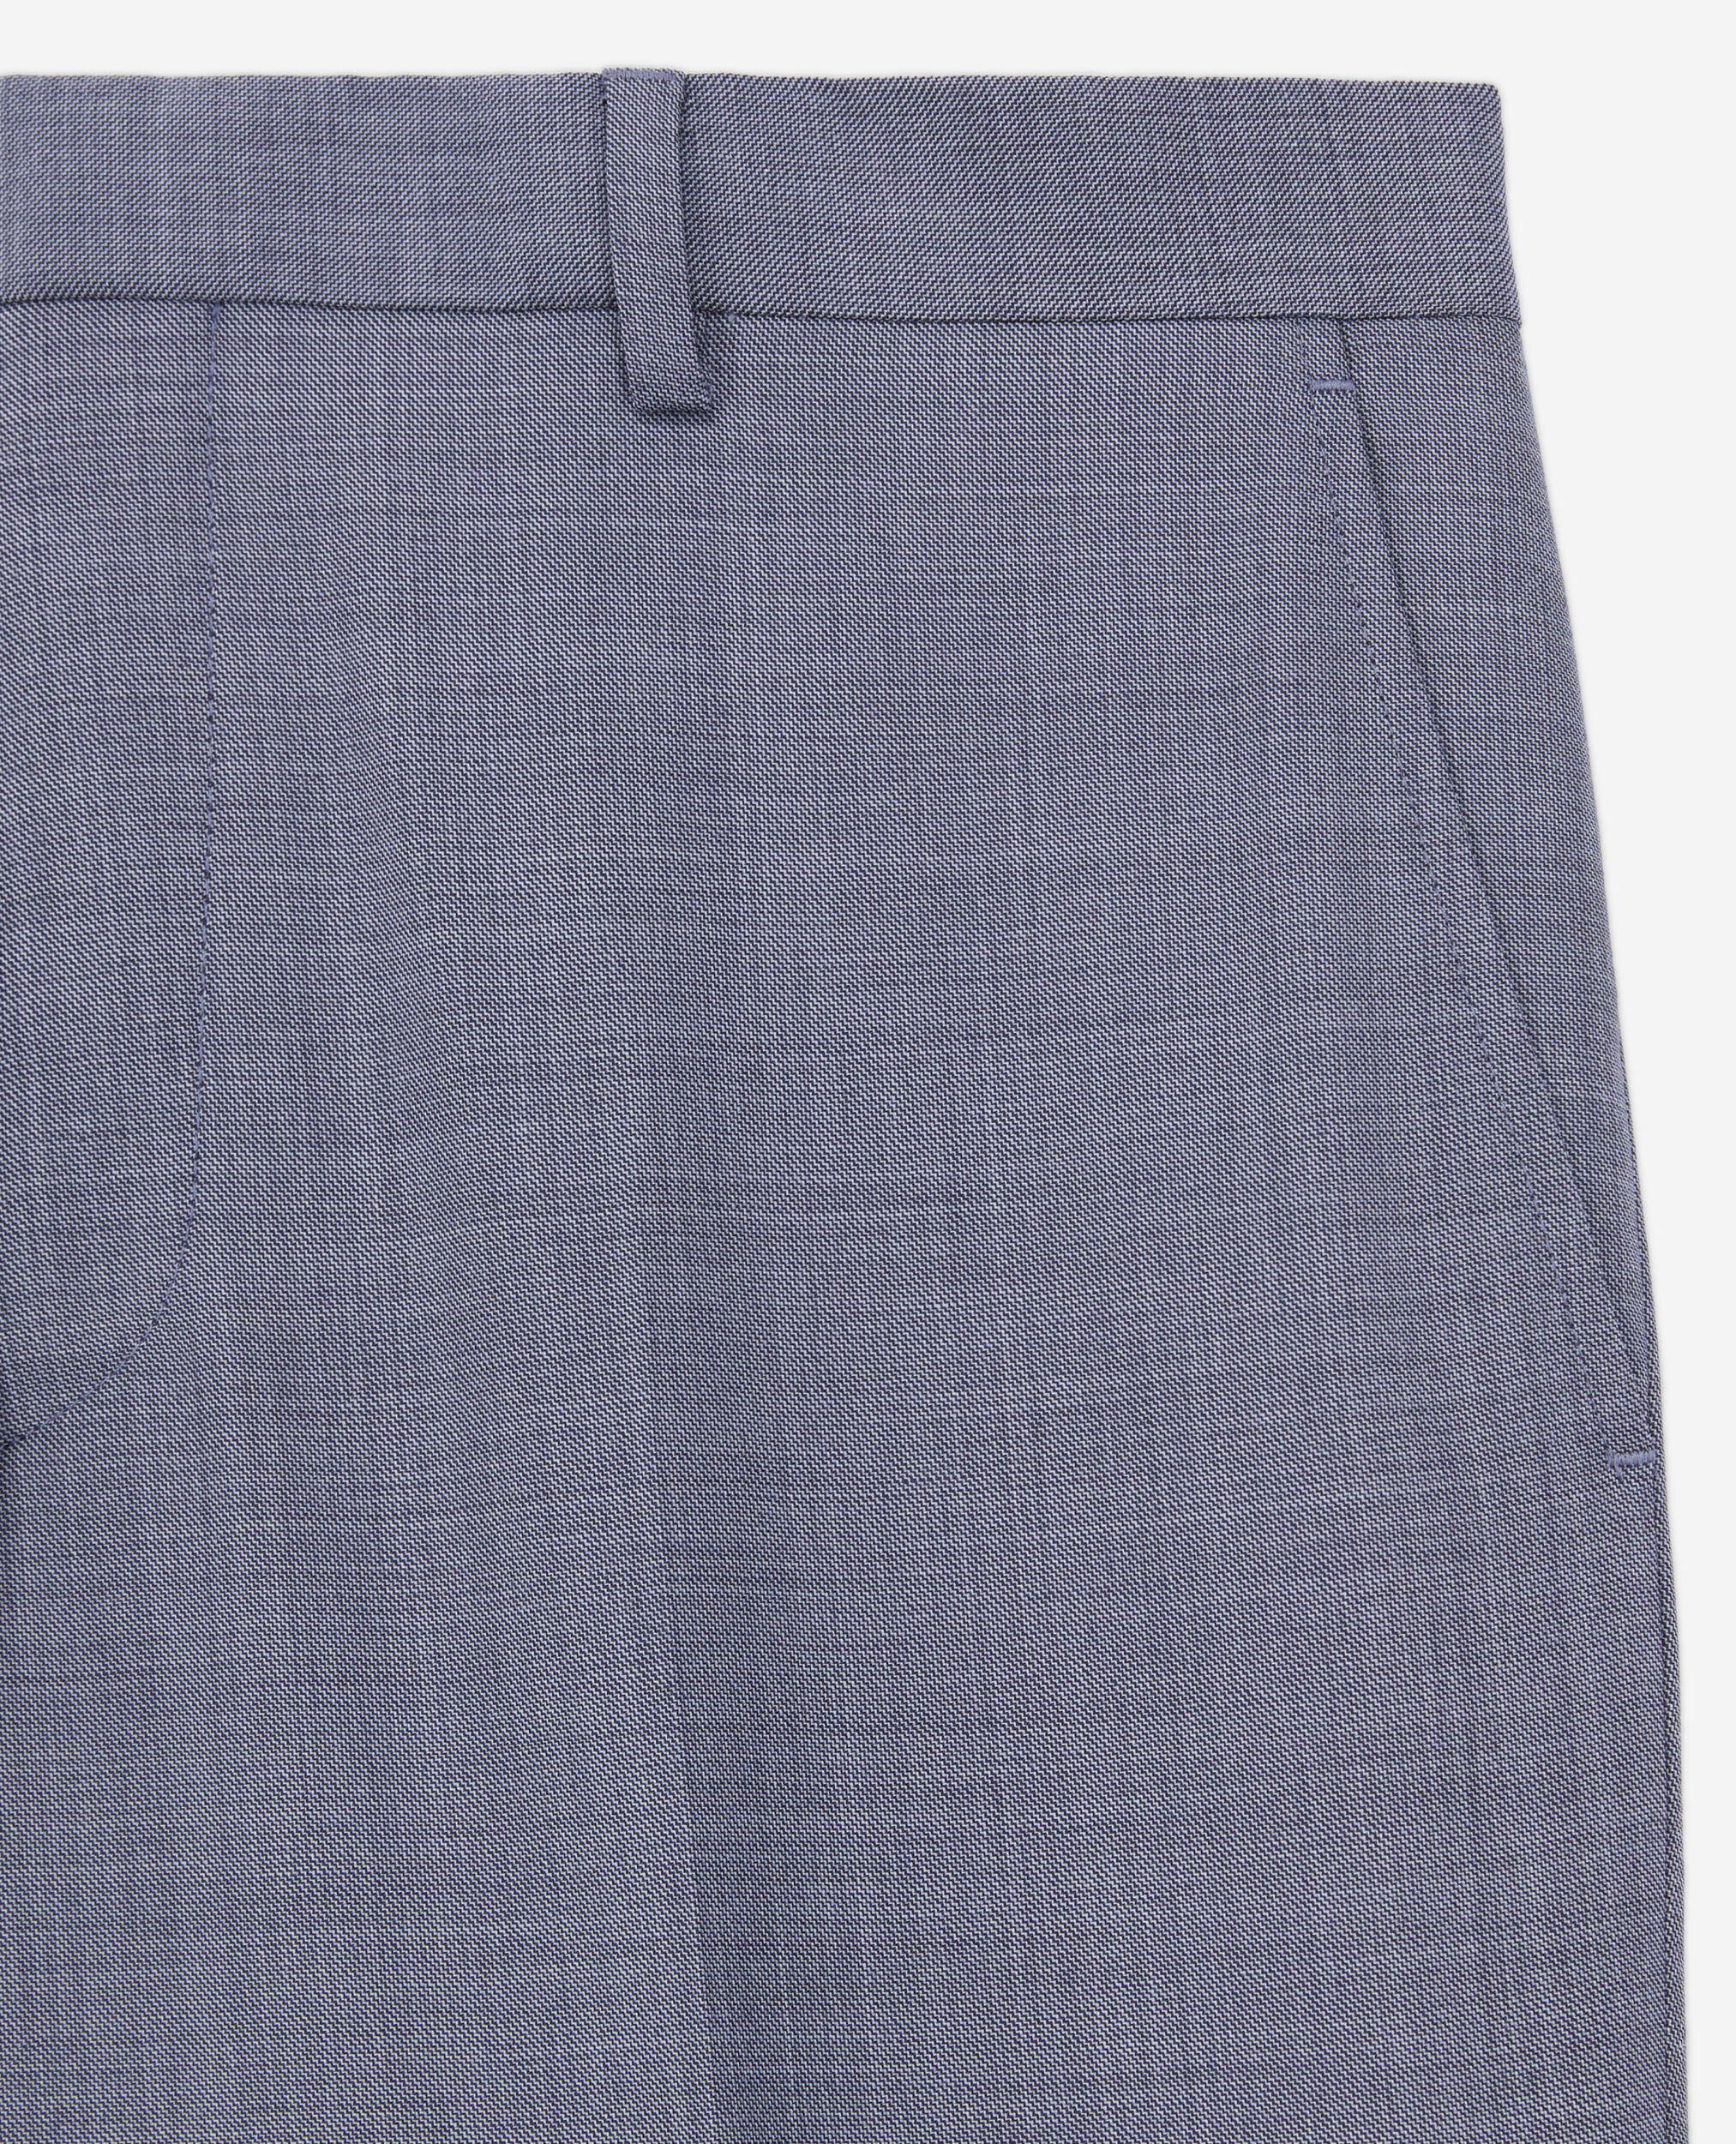 Blue and grey checkered wool suit trousers, LIGHT BLUE, hi-res image number null